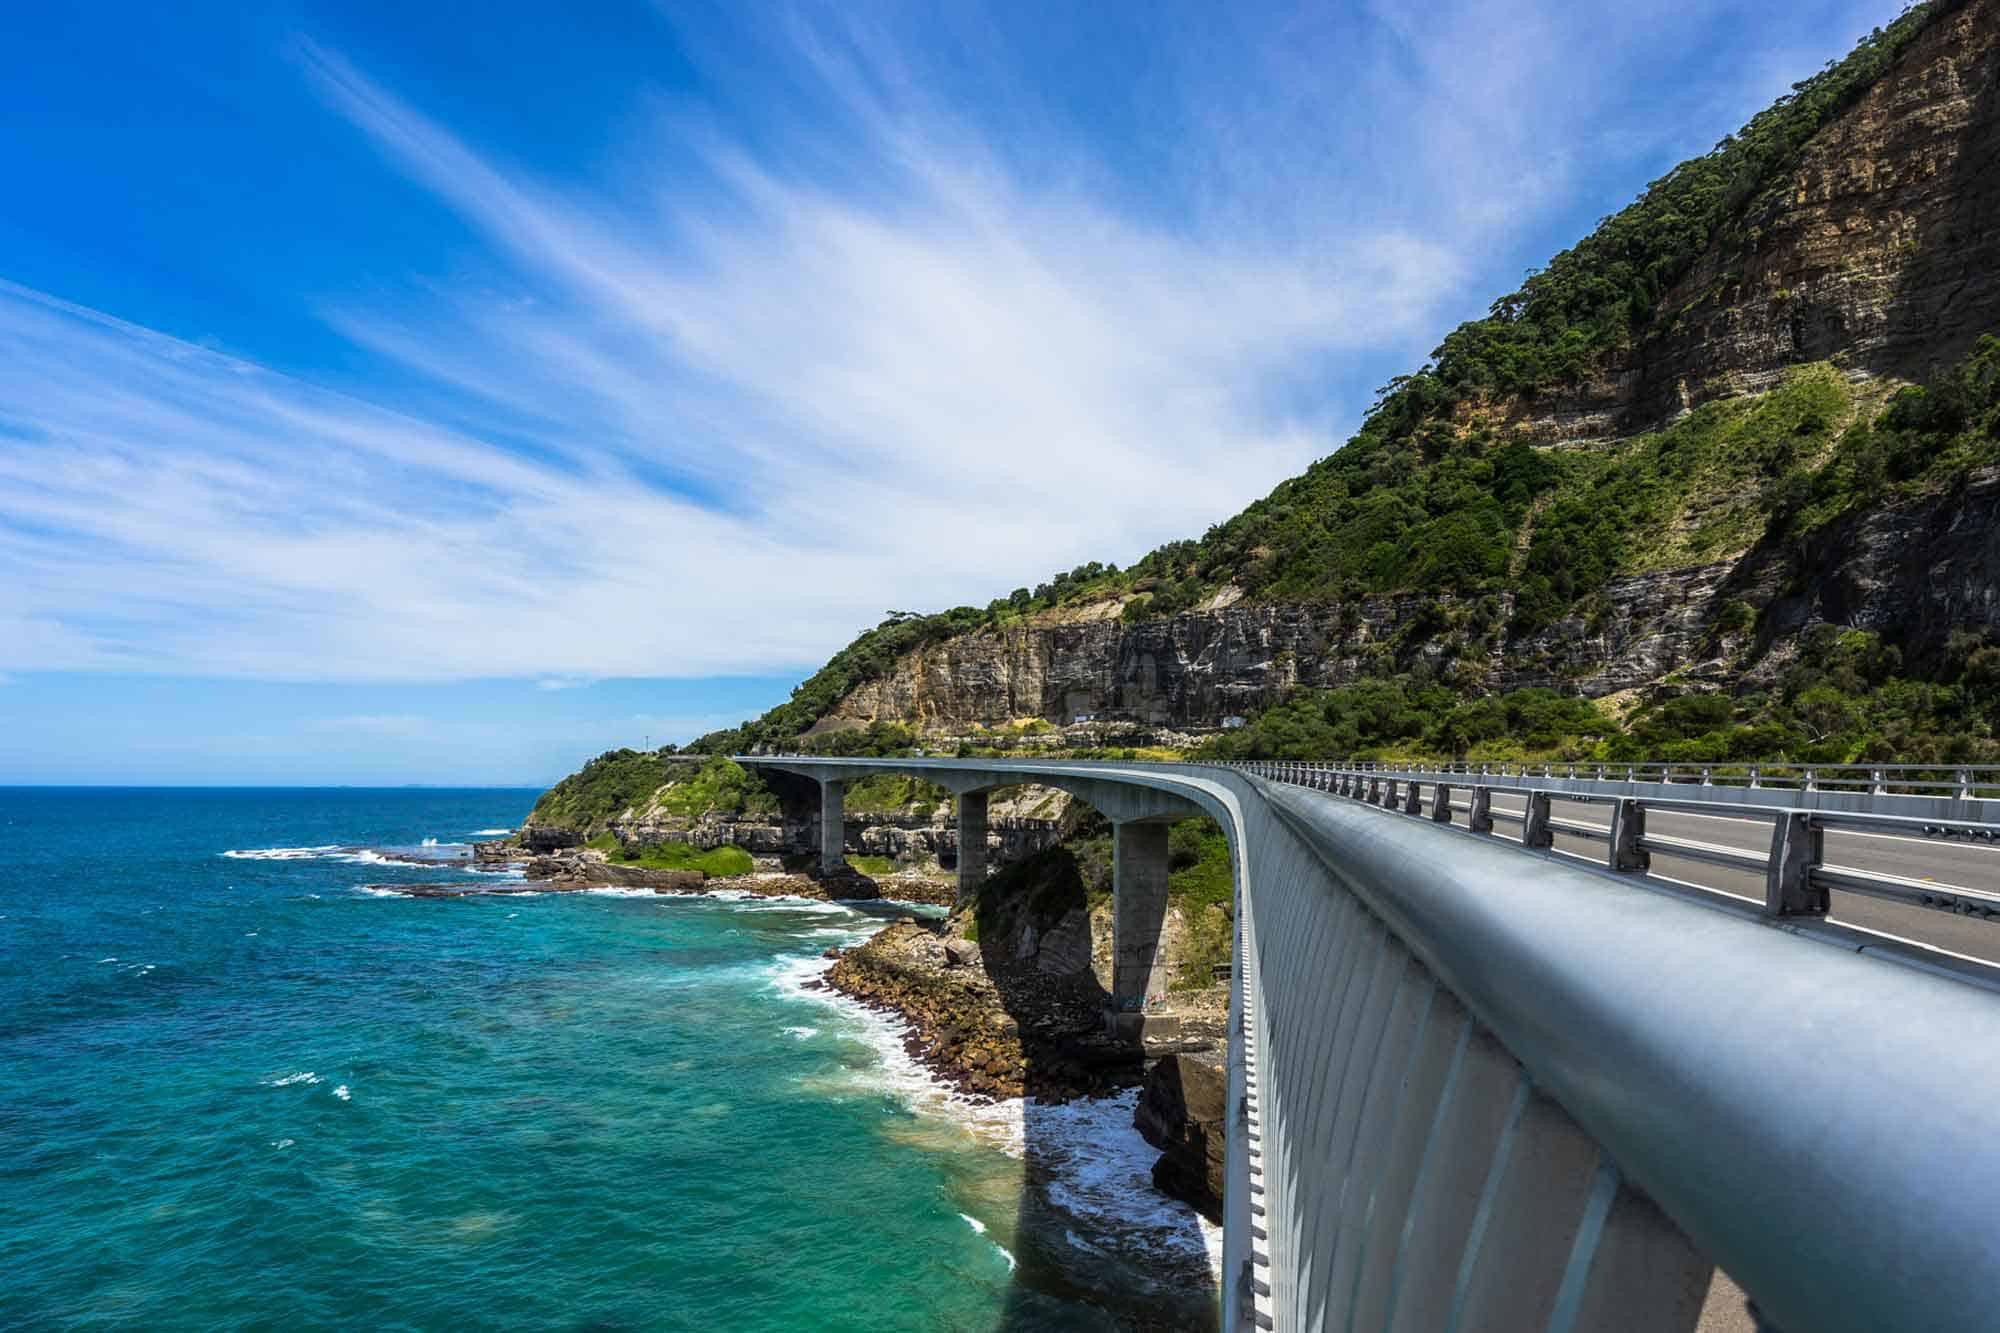 The 9 BEST Day Trips from Sydney (2022 Updated Guide)